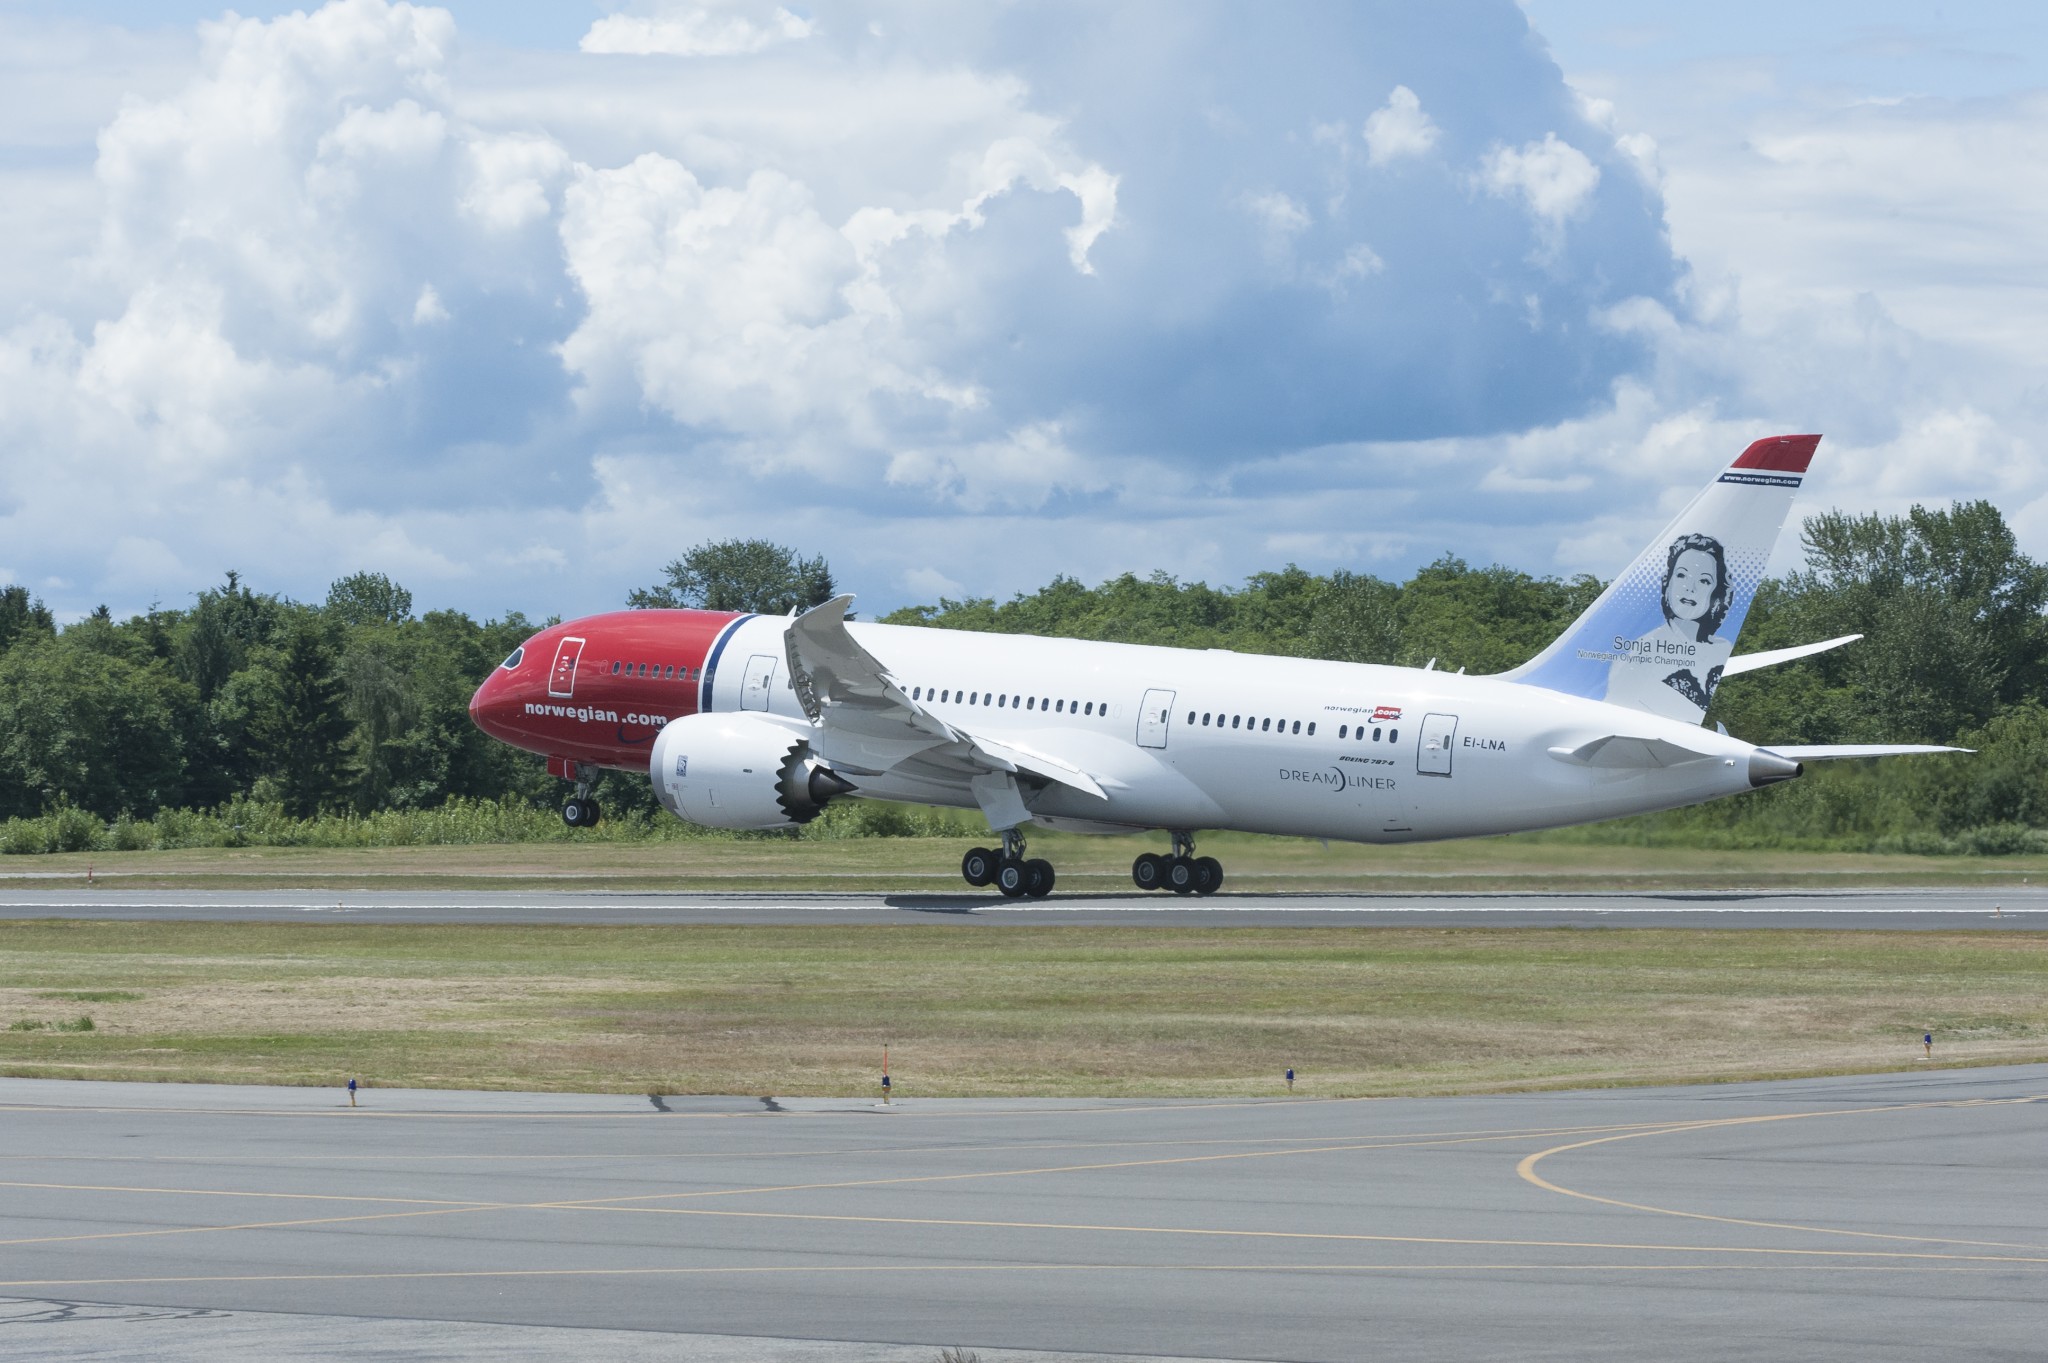 Norwegian has completed financing of additional nine aircraft